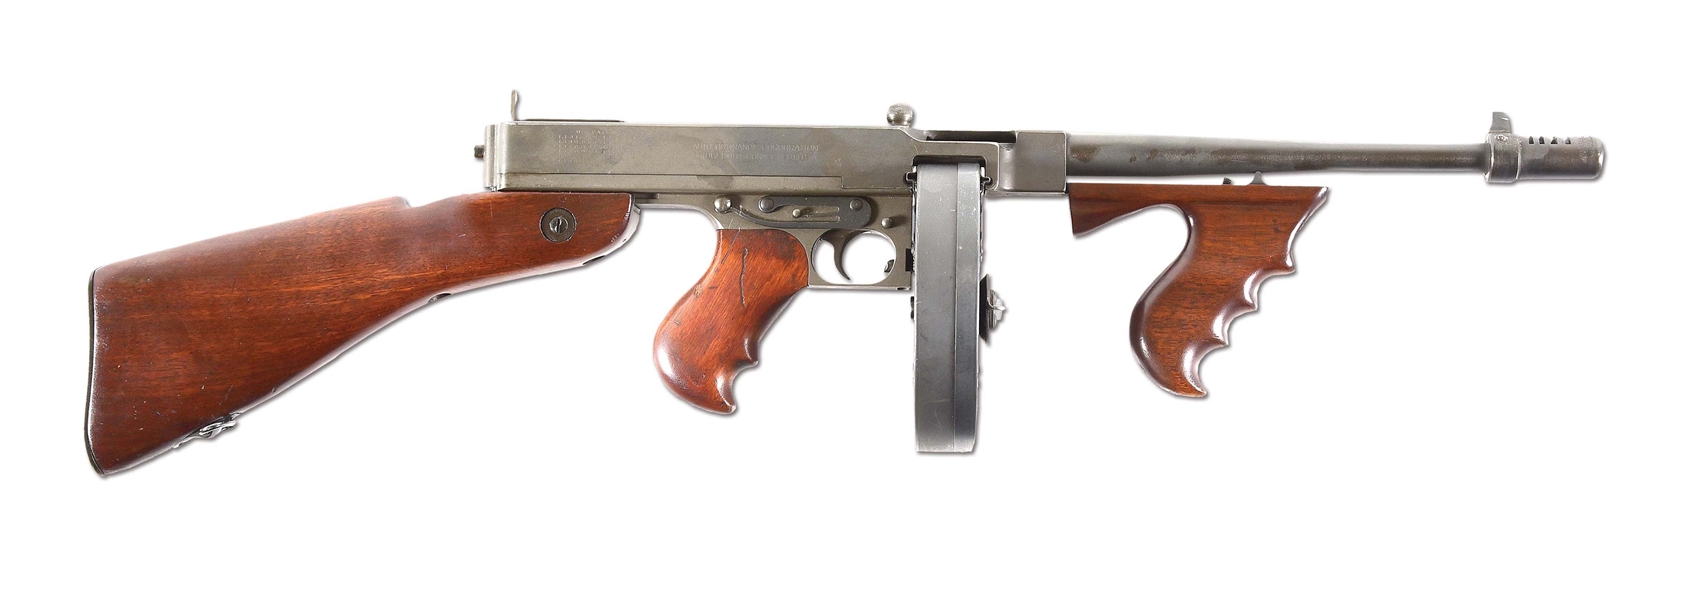 (N) REFINISHED AUTO ORDNANCE 1928A1 THOMPSON MACHINE GUN WITH DRUM AND MAGAZINES (CURIO AND RELIC).